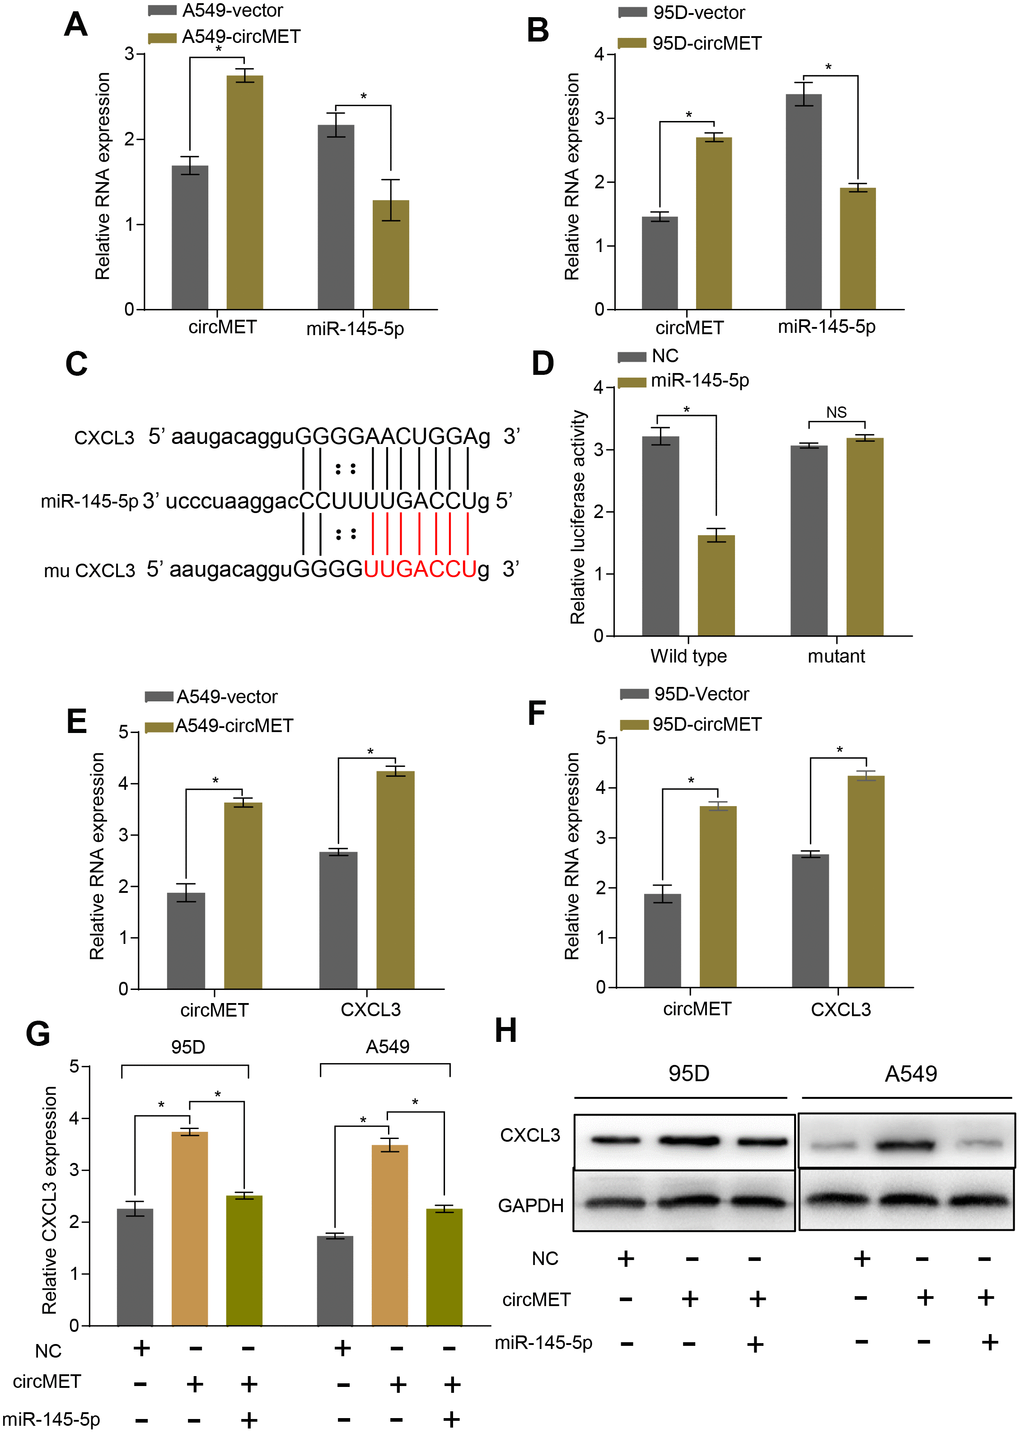 circMET regulates miR-145-5p and targets the CXCL3 axis. (A) and (B) RT-qPCR analyses the mRNA levels of miR-145-5p expression after overexpressing circMET in NSCLC A549 and 95D cells. GAPDH was used as a loading control. (C) The putative miR-145-5p binding site in the 3’UTR of CXCL3 was predicated by StarBase v3.0. (D) the luciferase activity of pLG3-CXCL3 in HEK-293T cells after cotransfection with miR-145-5p. (E) and (F) RT-qPCR analyses CXCL3 expression after overexpressing circMET in NSCLC A549 and 95D cells. GAPDH was used as a control for loading. (G) and (H) CircMET significantly promoted the mRNA and protein levels of CXCL3 expression, whereas the effect was retarded after upregulation of miR-145-5p. The data are represented as the mean ± SD, * p 